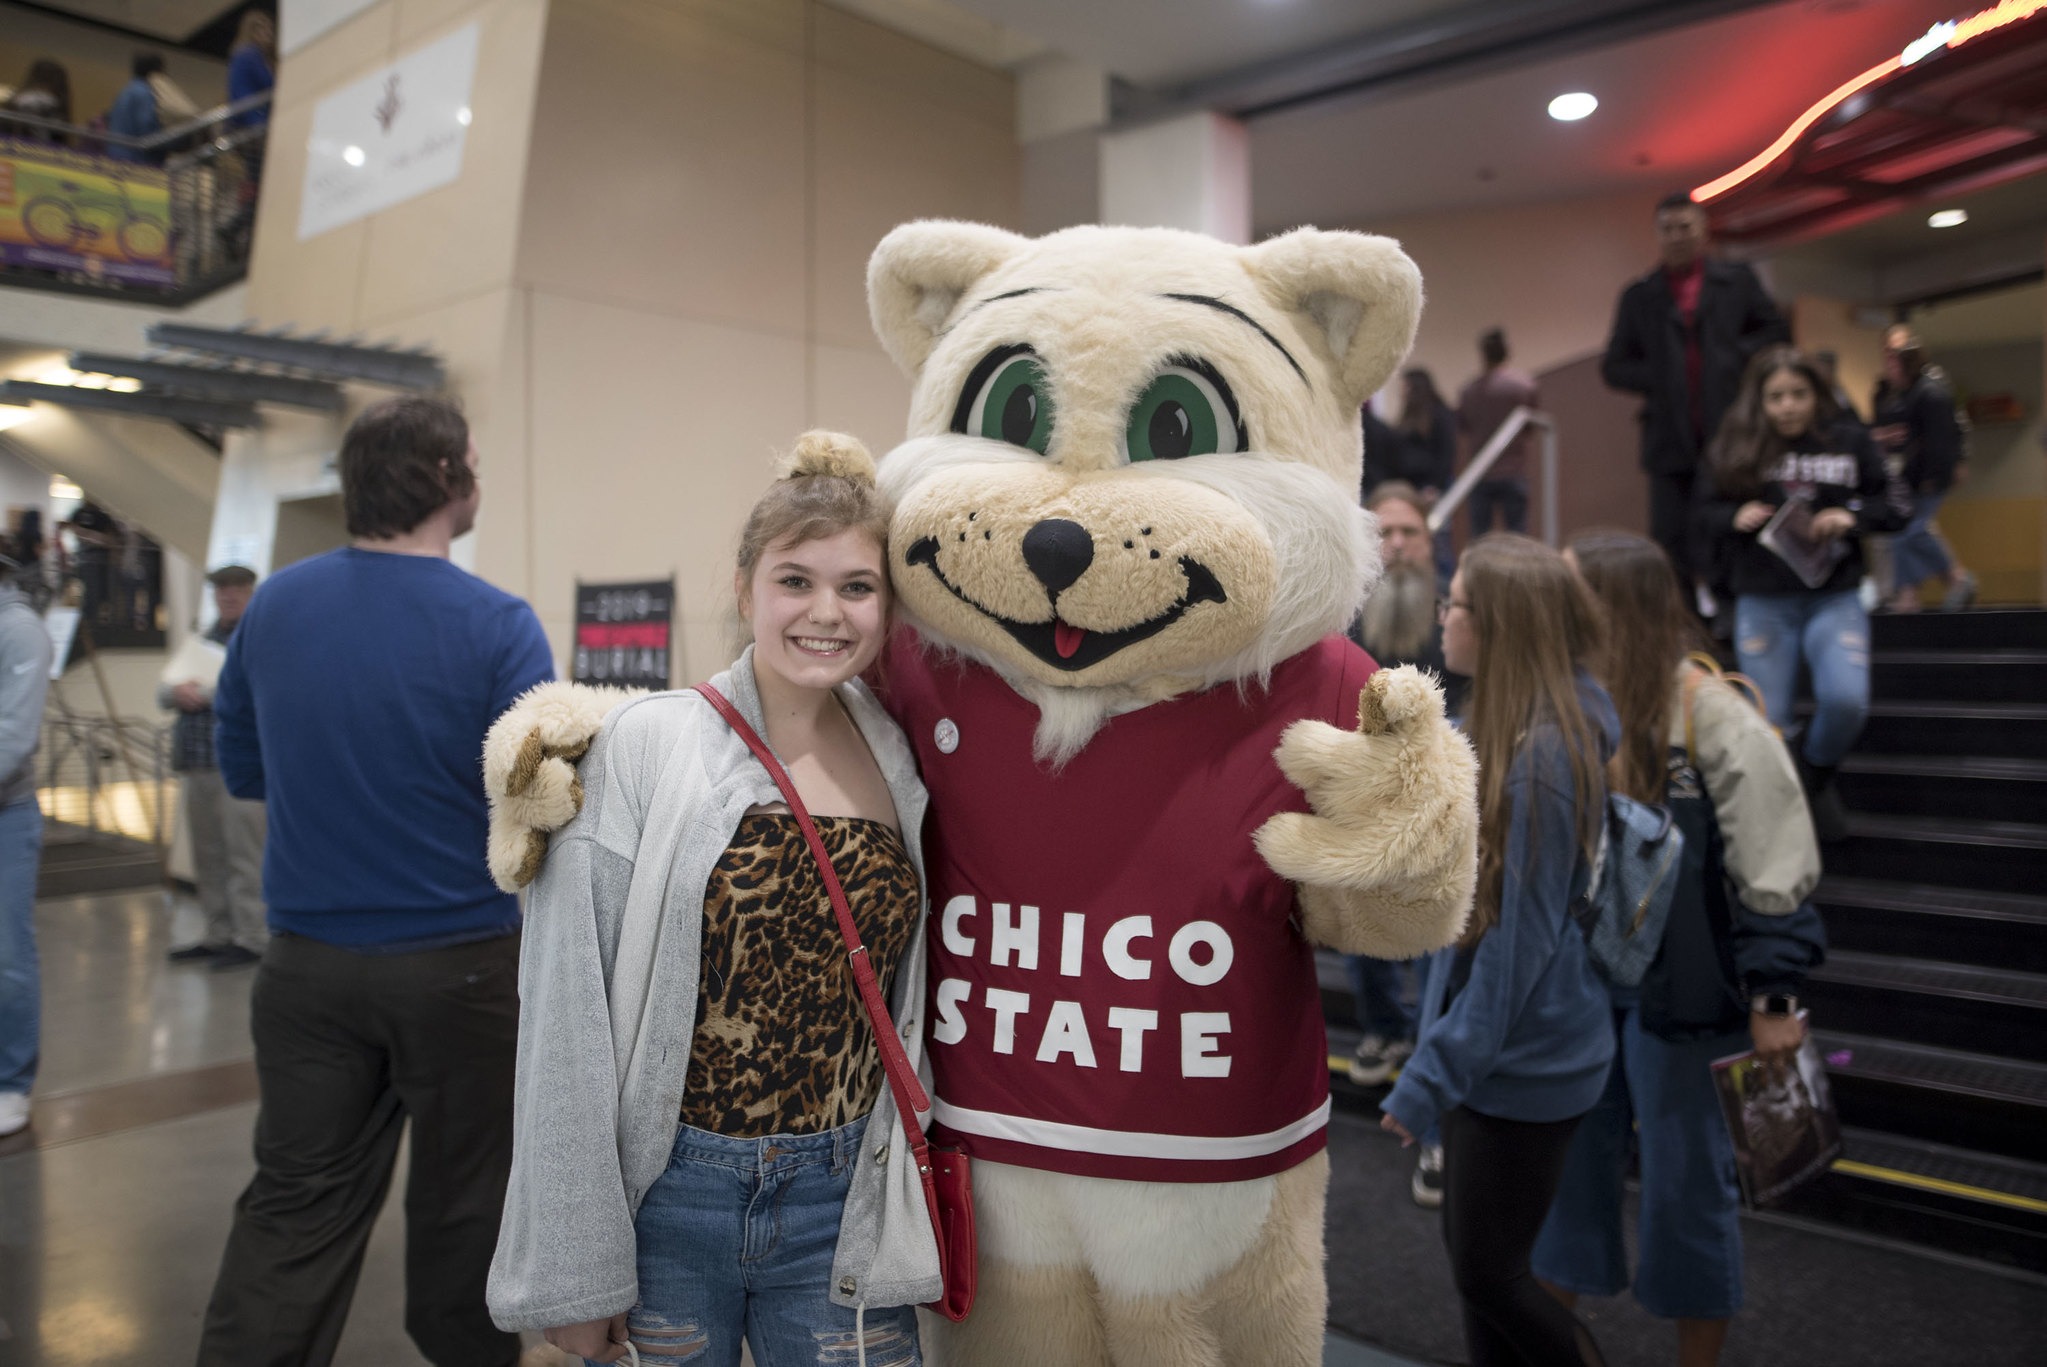 Chico State student with Willy the Wildcat